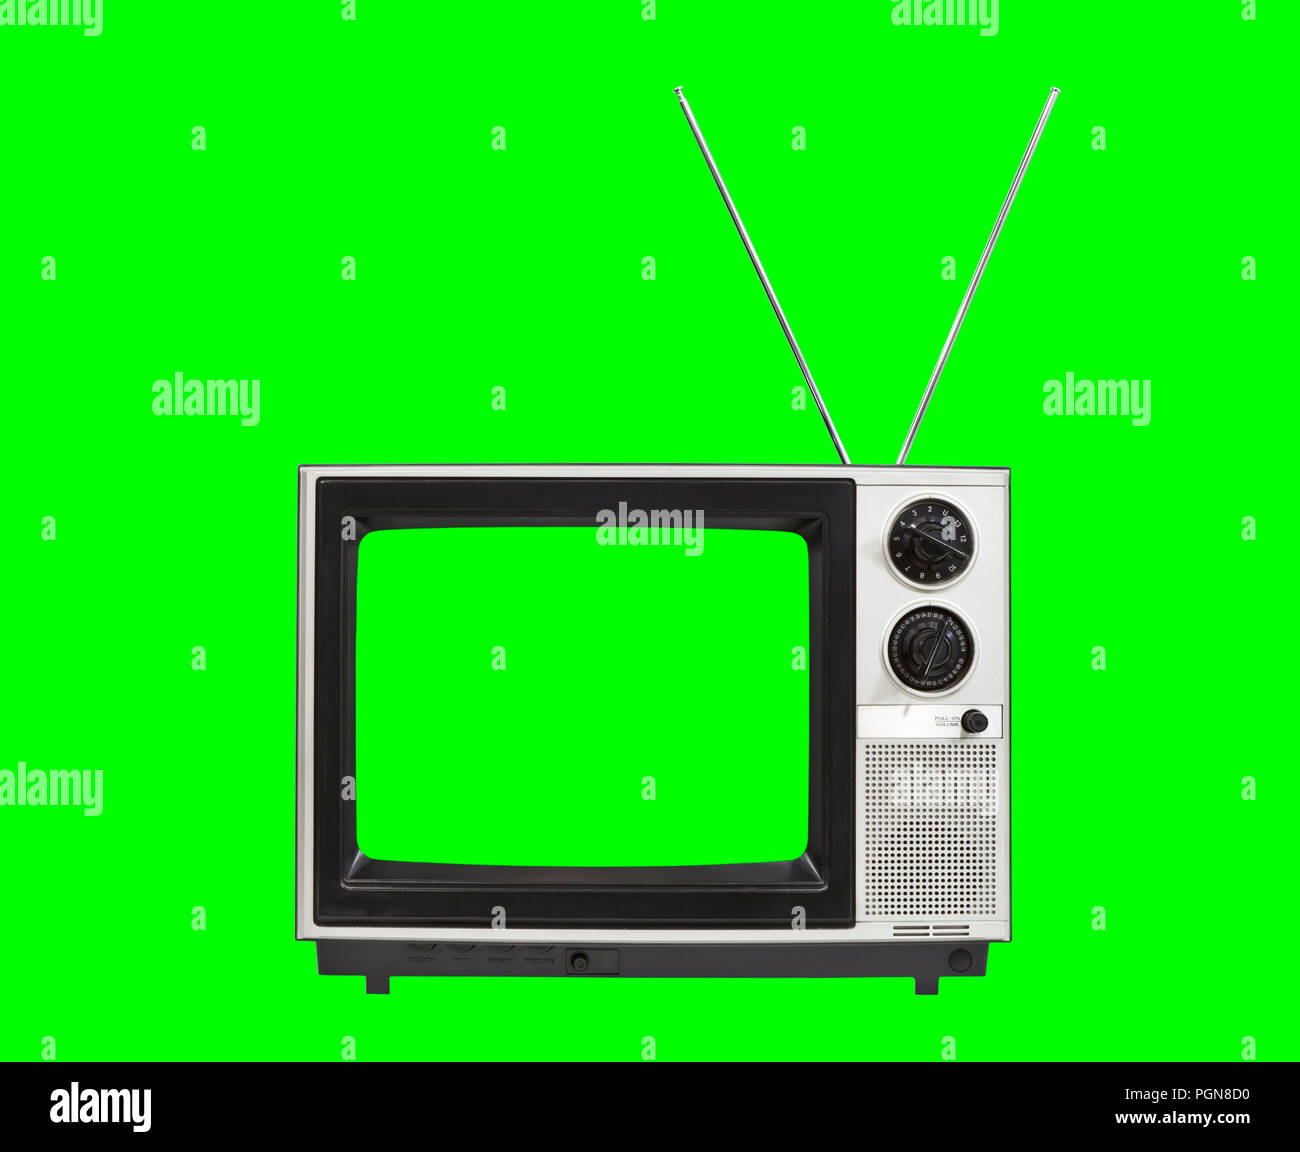 Portable vintage television with antennas and chroma green screen and background. Stock Photo